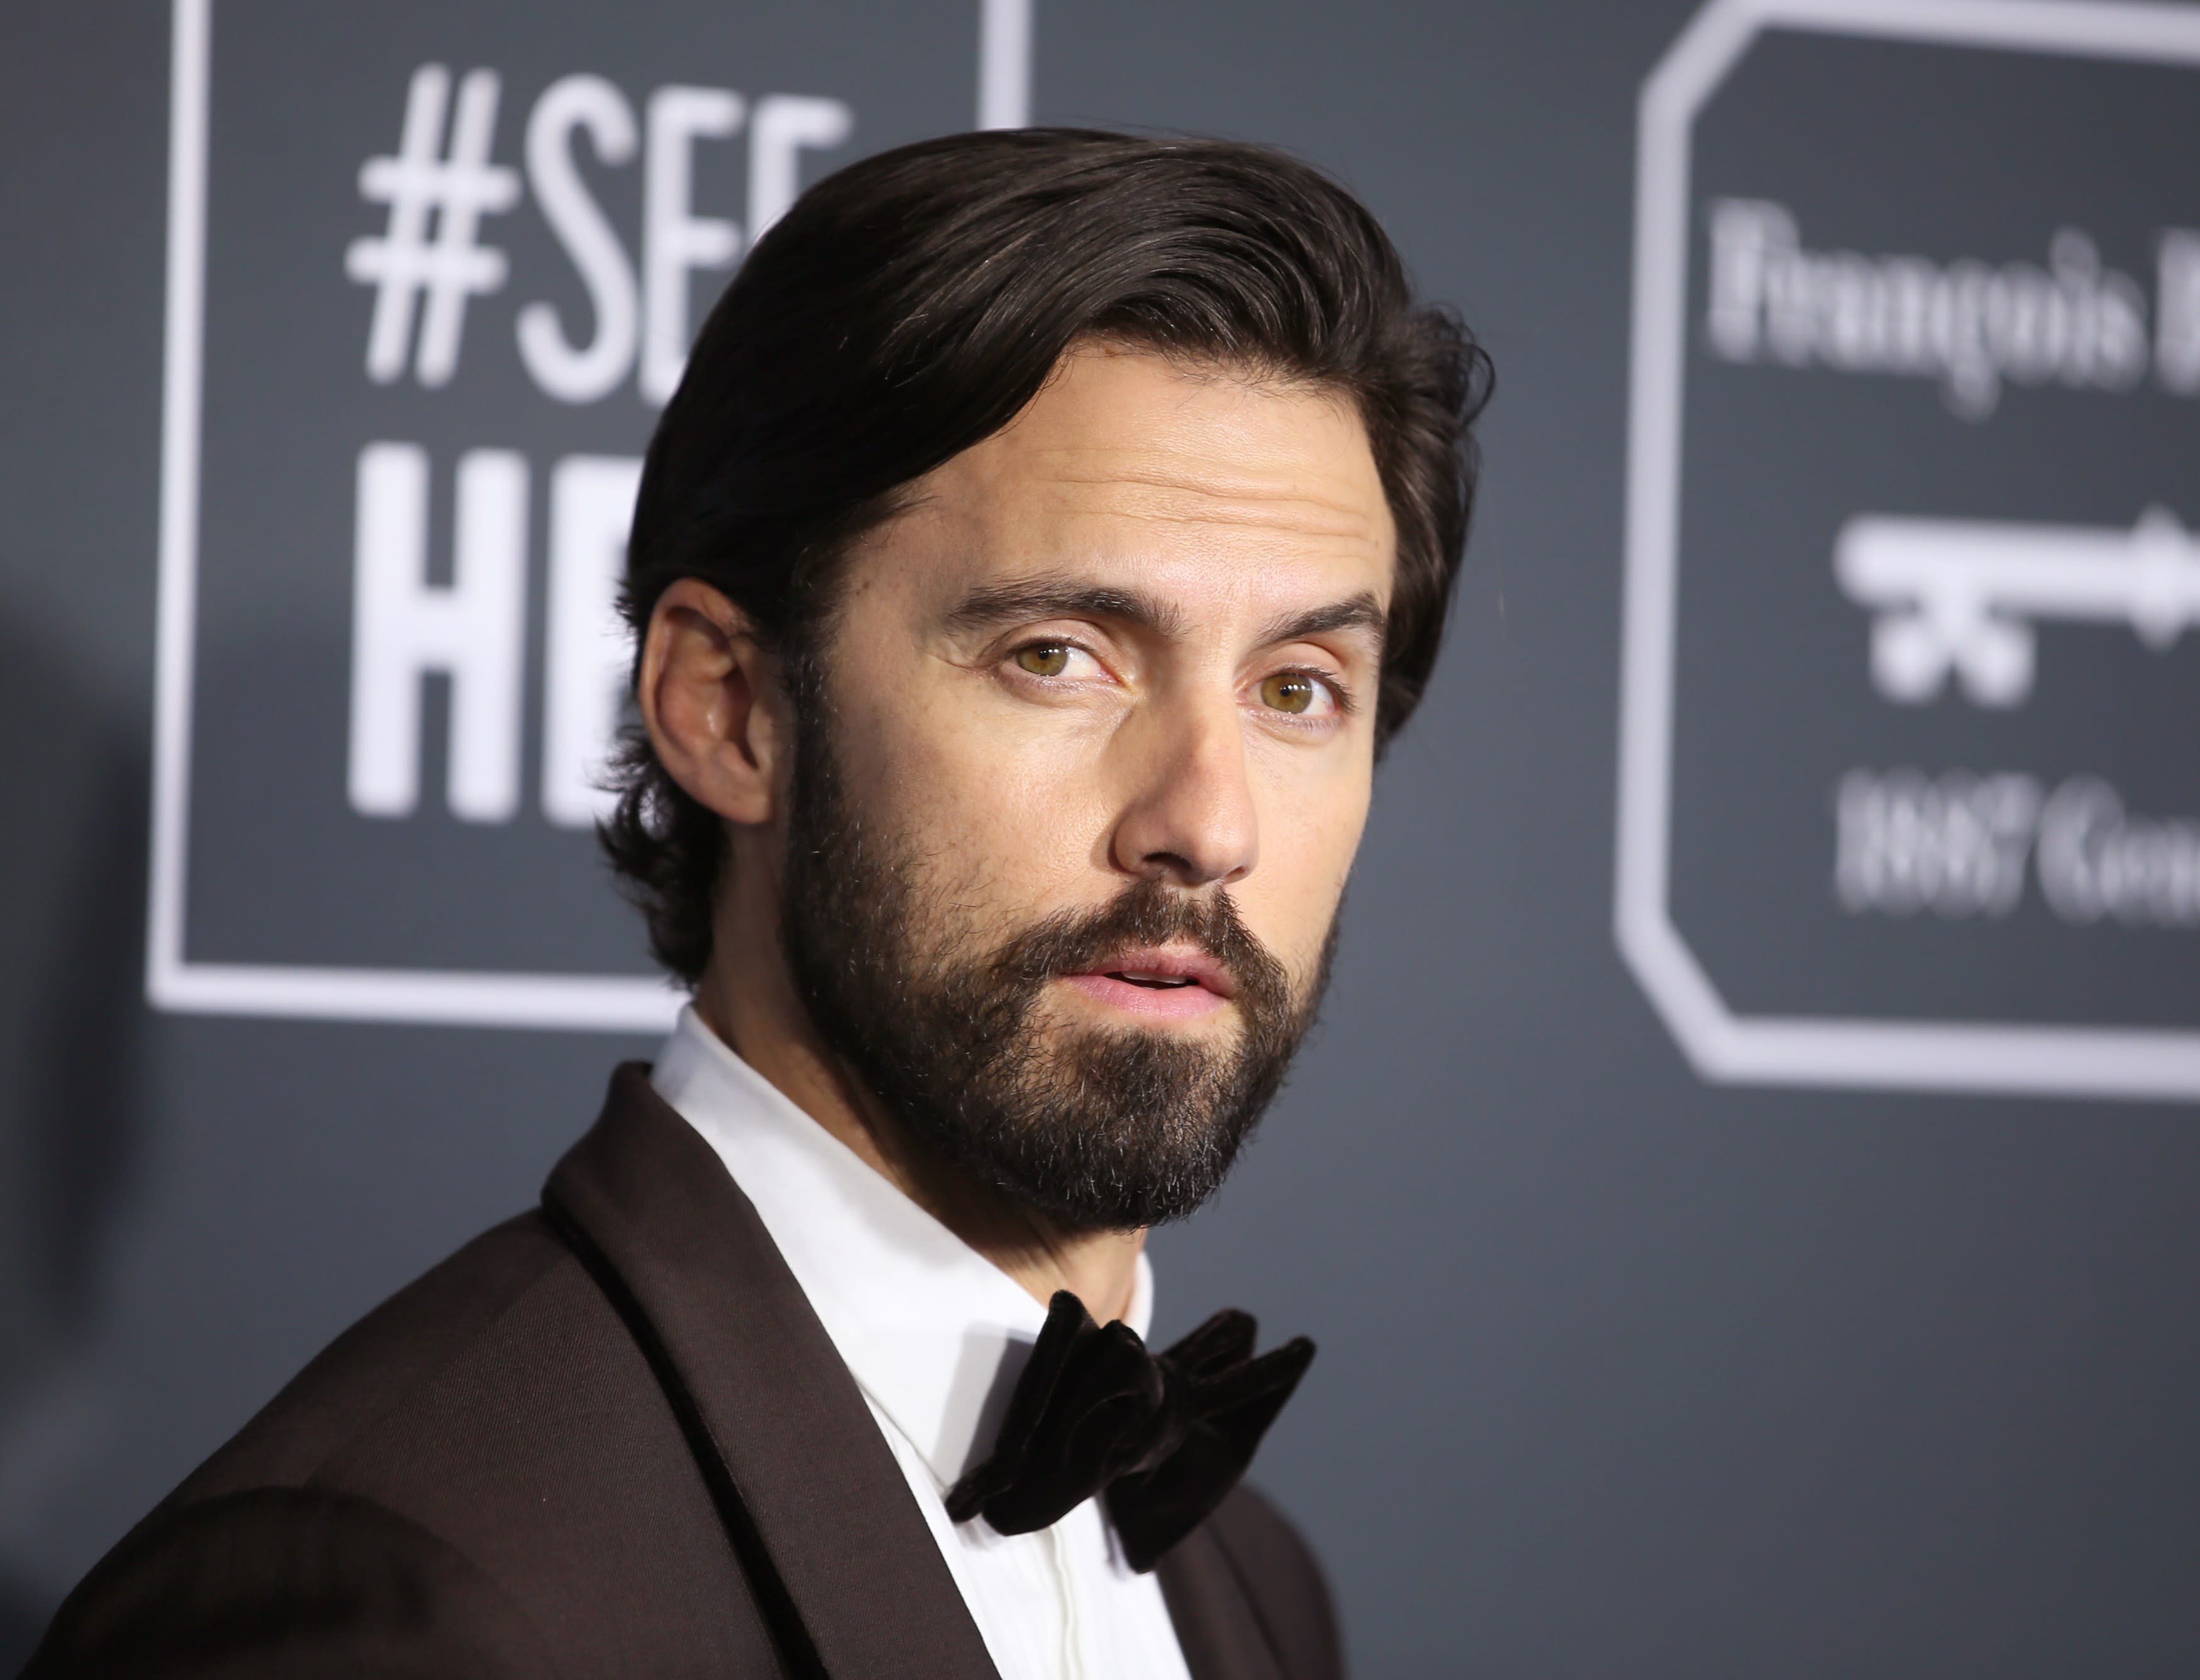 2. How to Get Milo Ventimiglia's Blonde Hair - wide 1